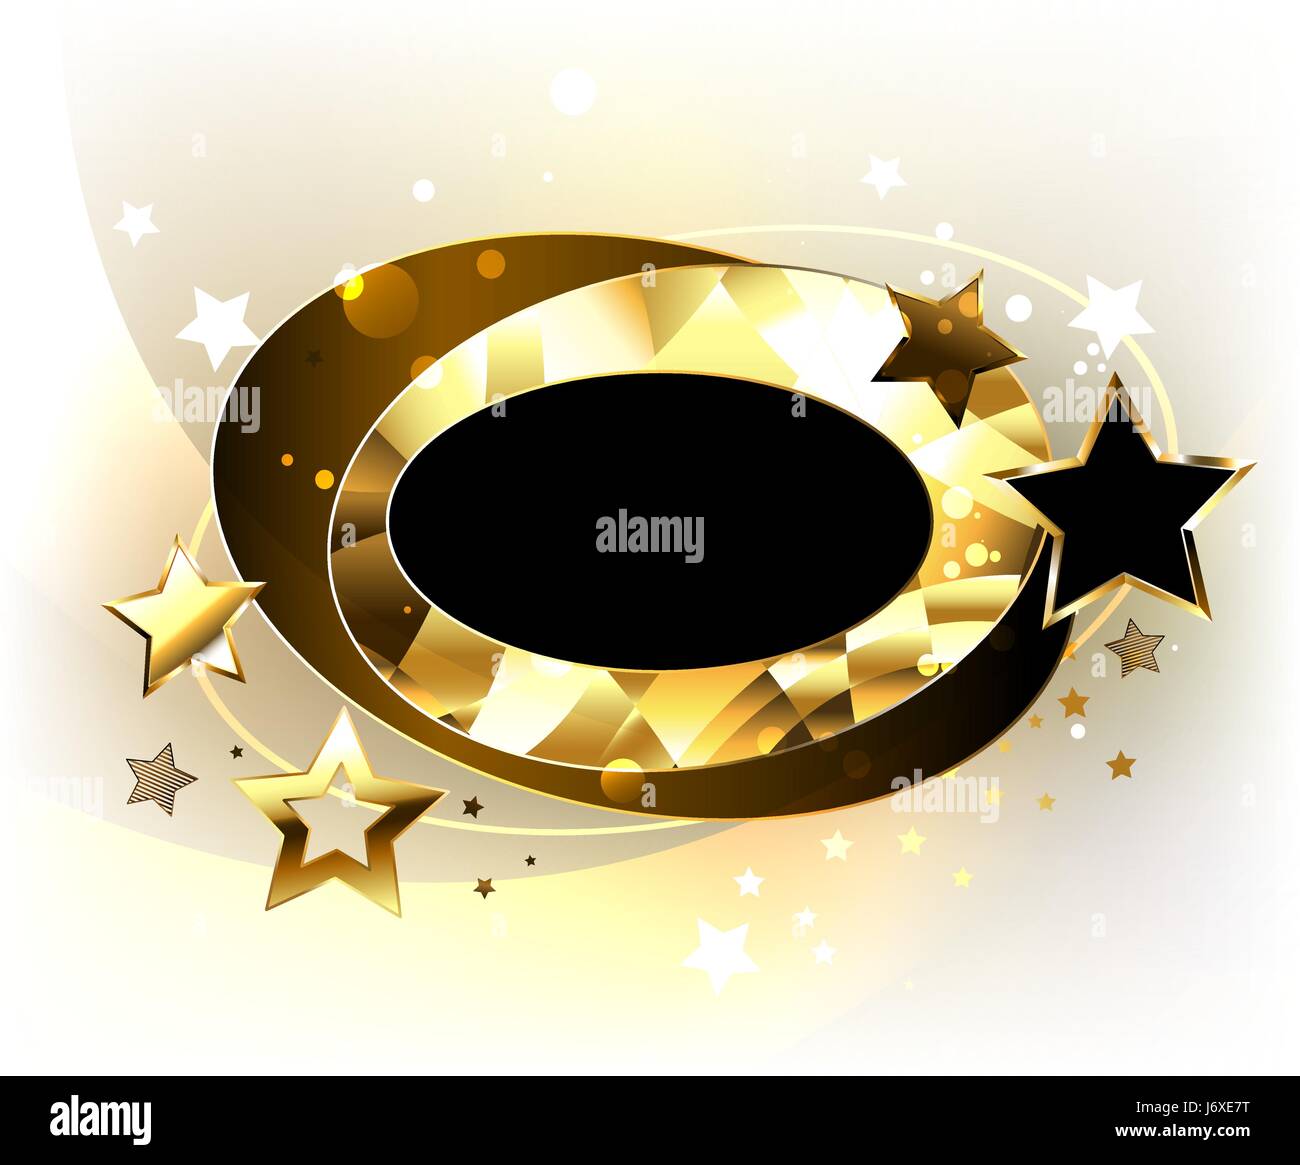 Dynamic, oval, polygonal, golden banner with gold and black stars on a light background. Design with gold stars. Polygonal banner. Stock Vector